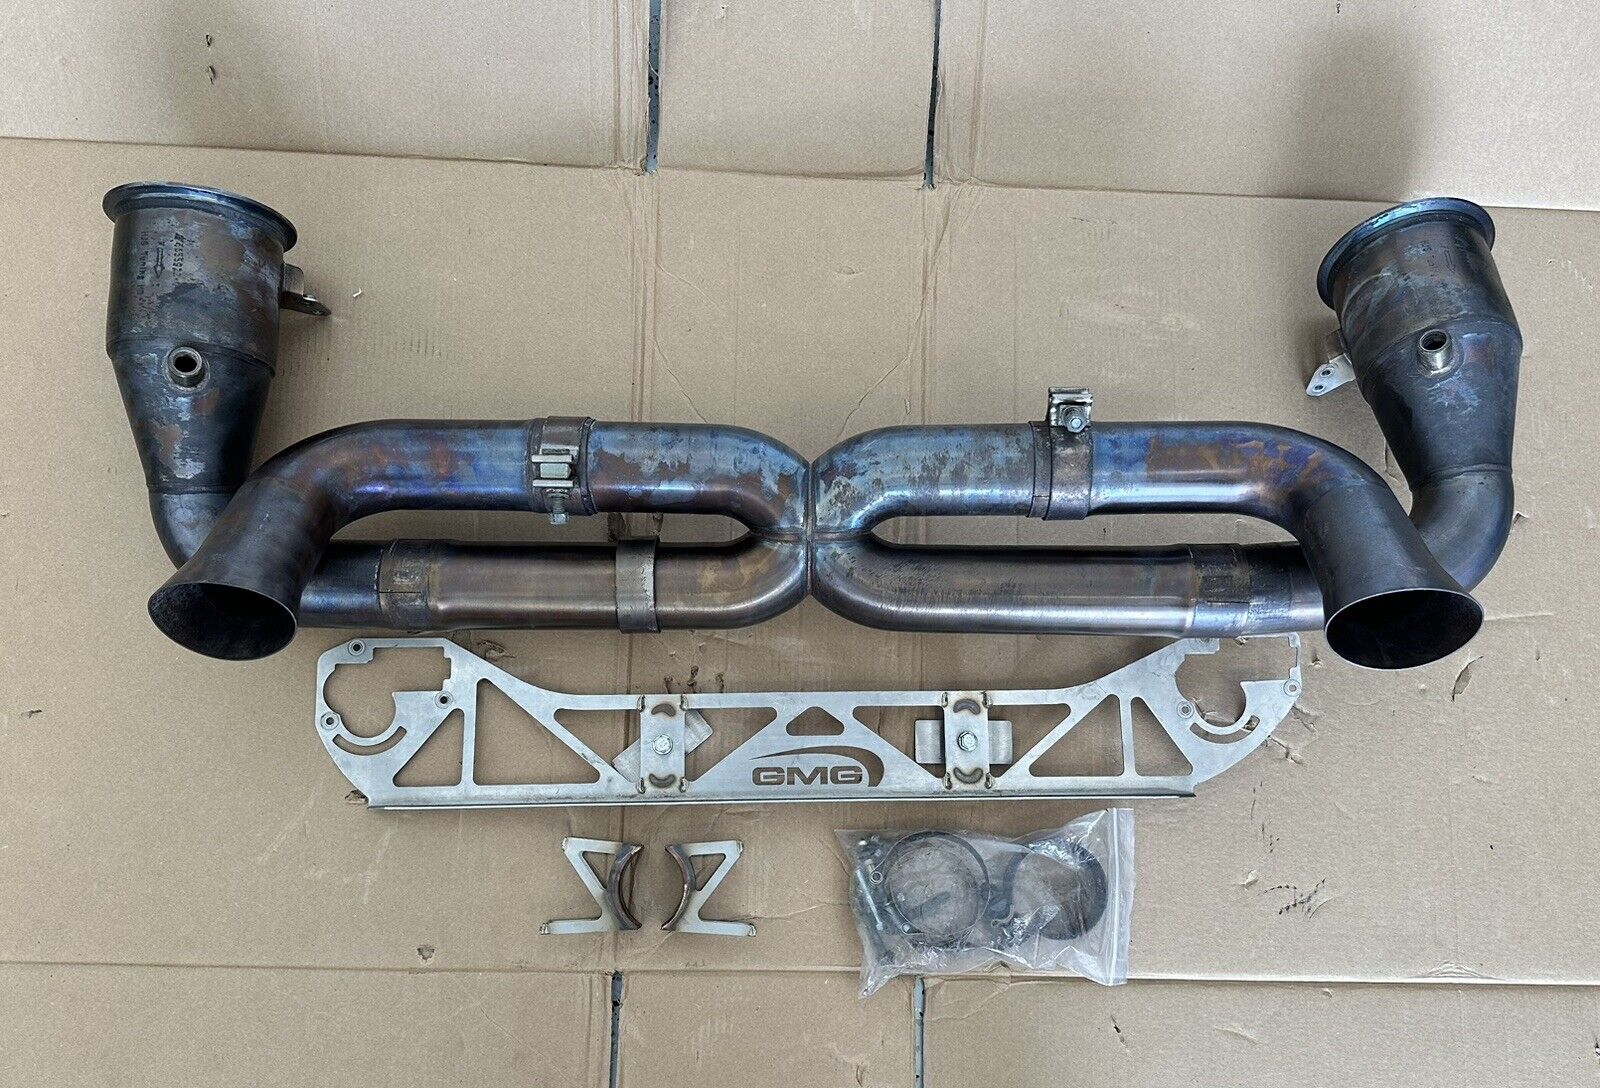 992 911 TURBO & TURBO S GMG WC-SPORT EXHAUST SYSTEM